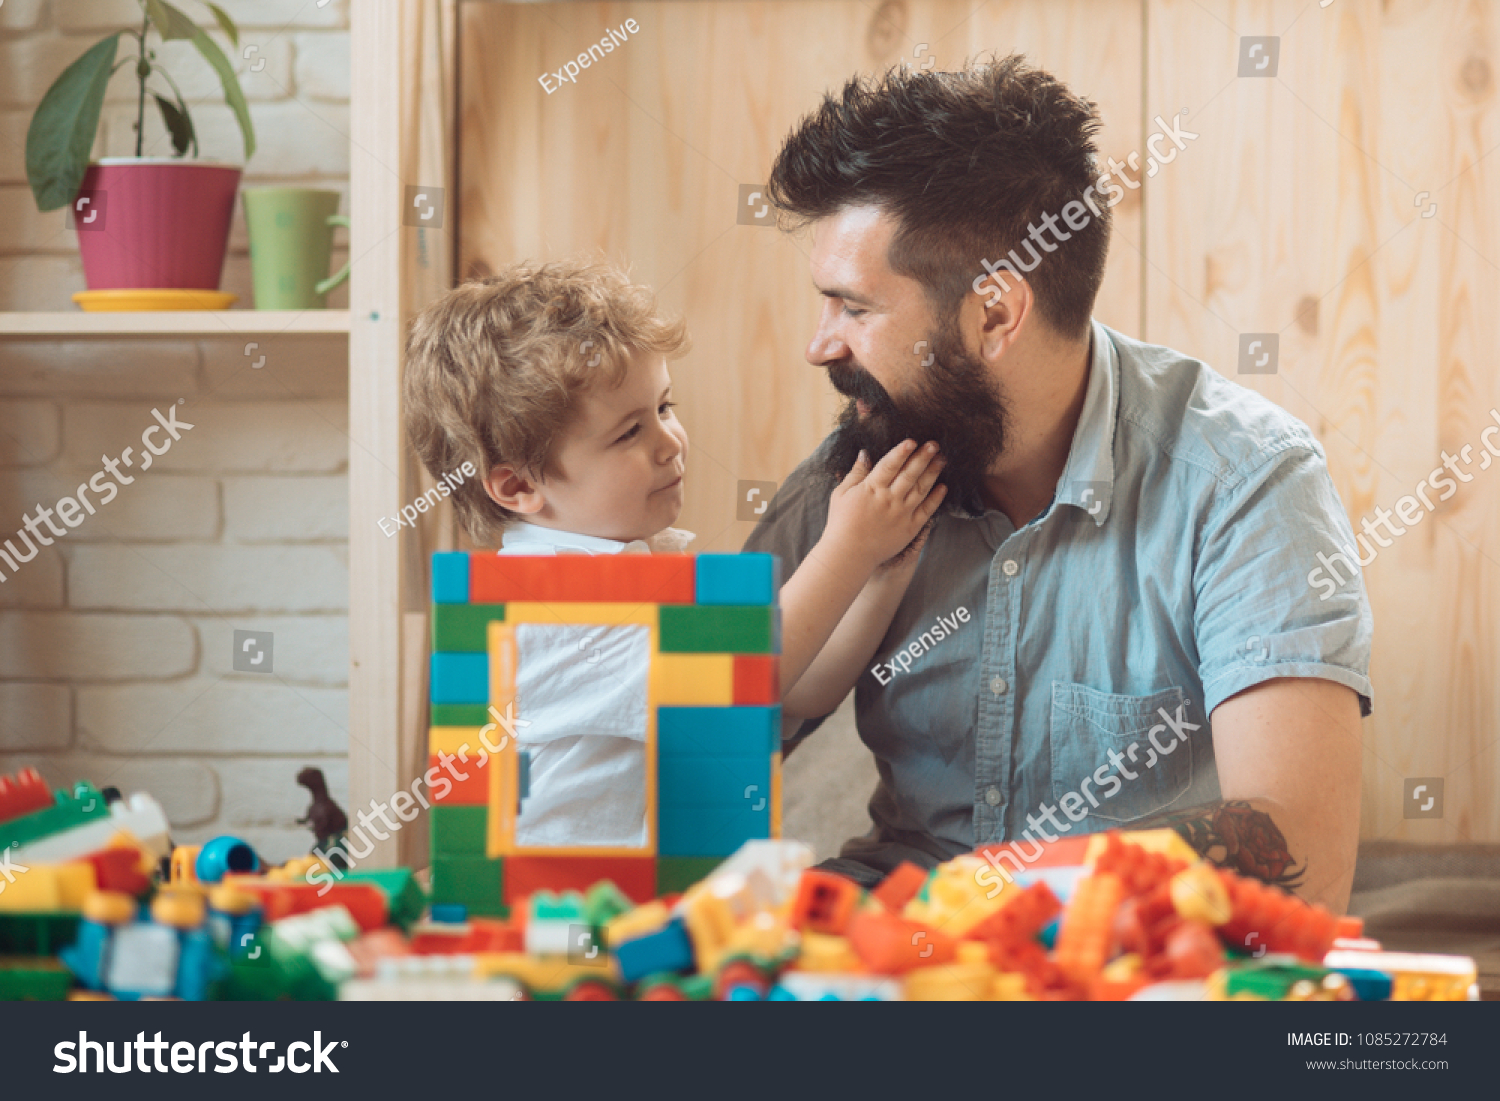 The boy touches his father's beard. An example and love. Tender feelings, family love. A good father. Father's Day. The son and father spend time together at home. A caring parent #1085272784